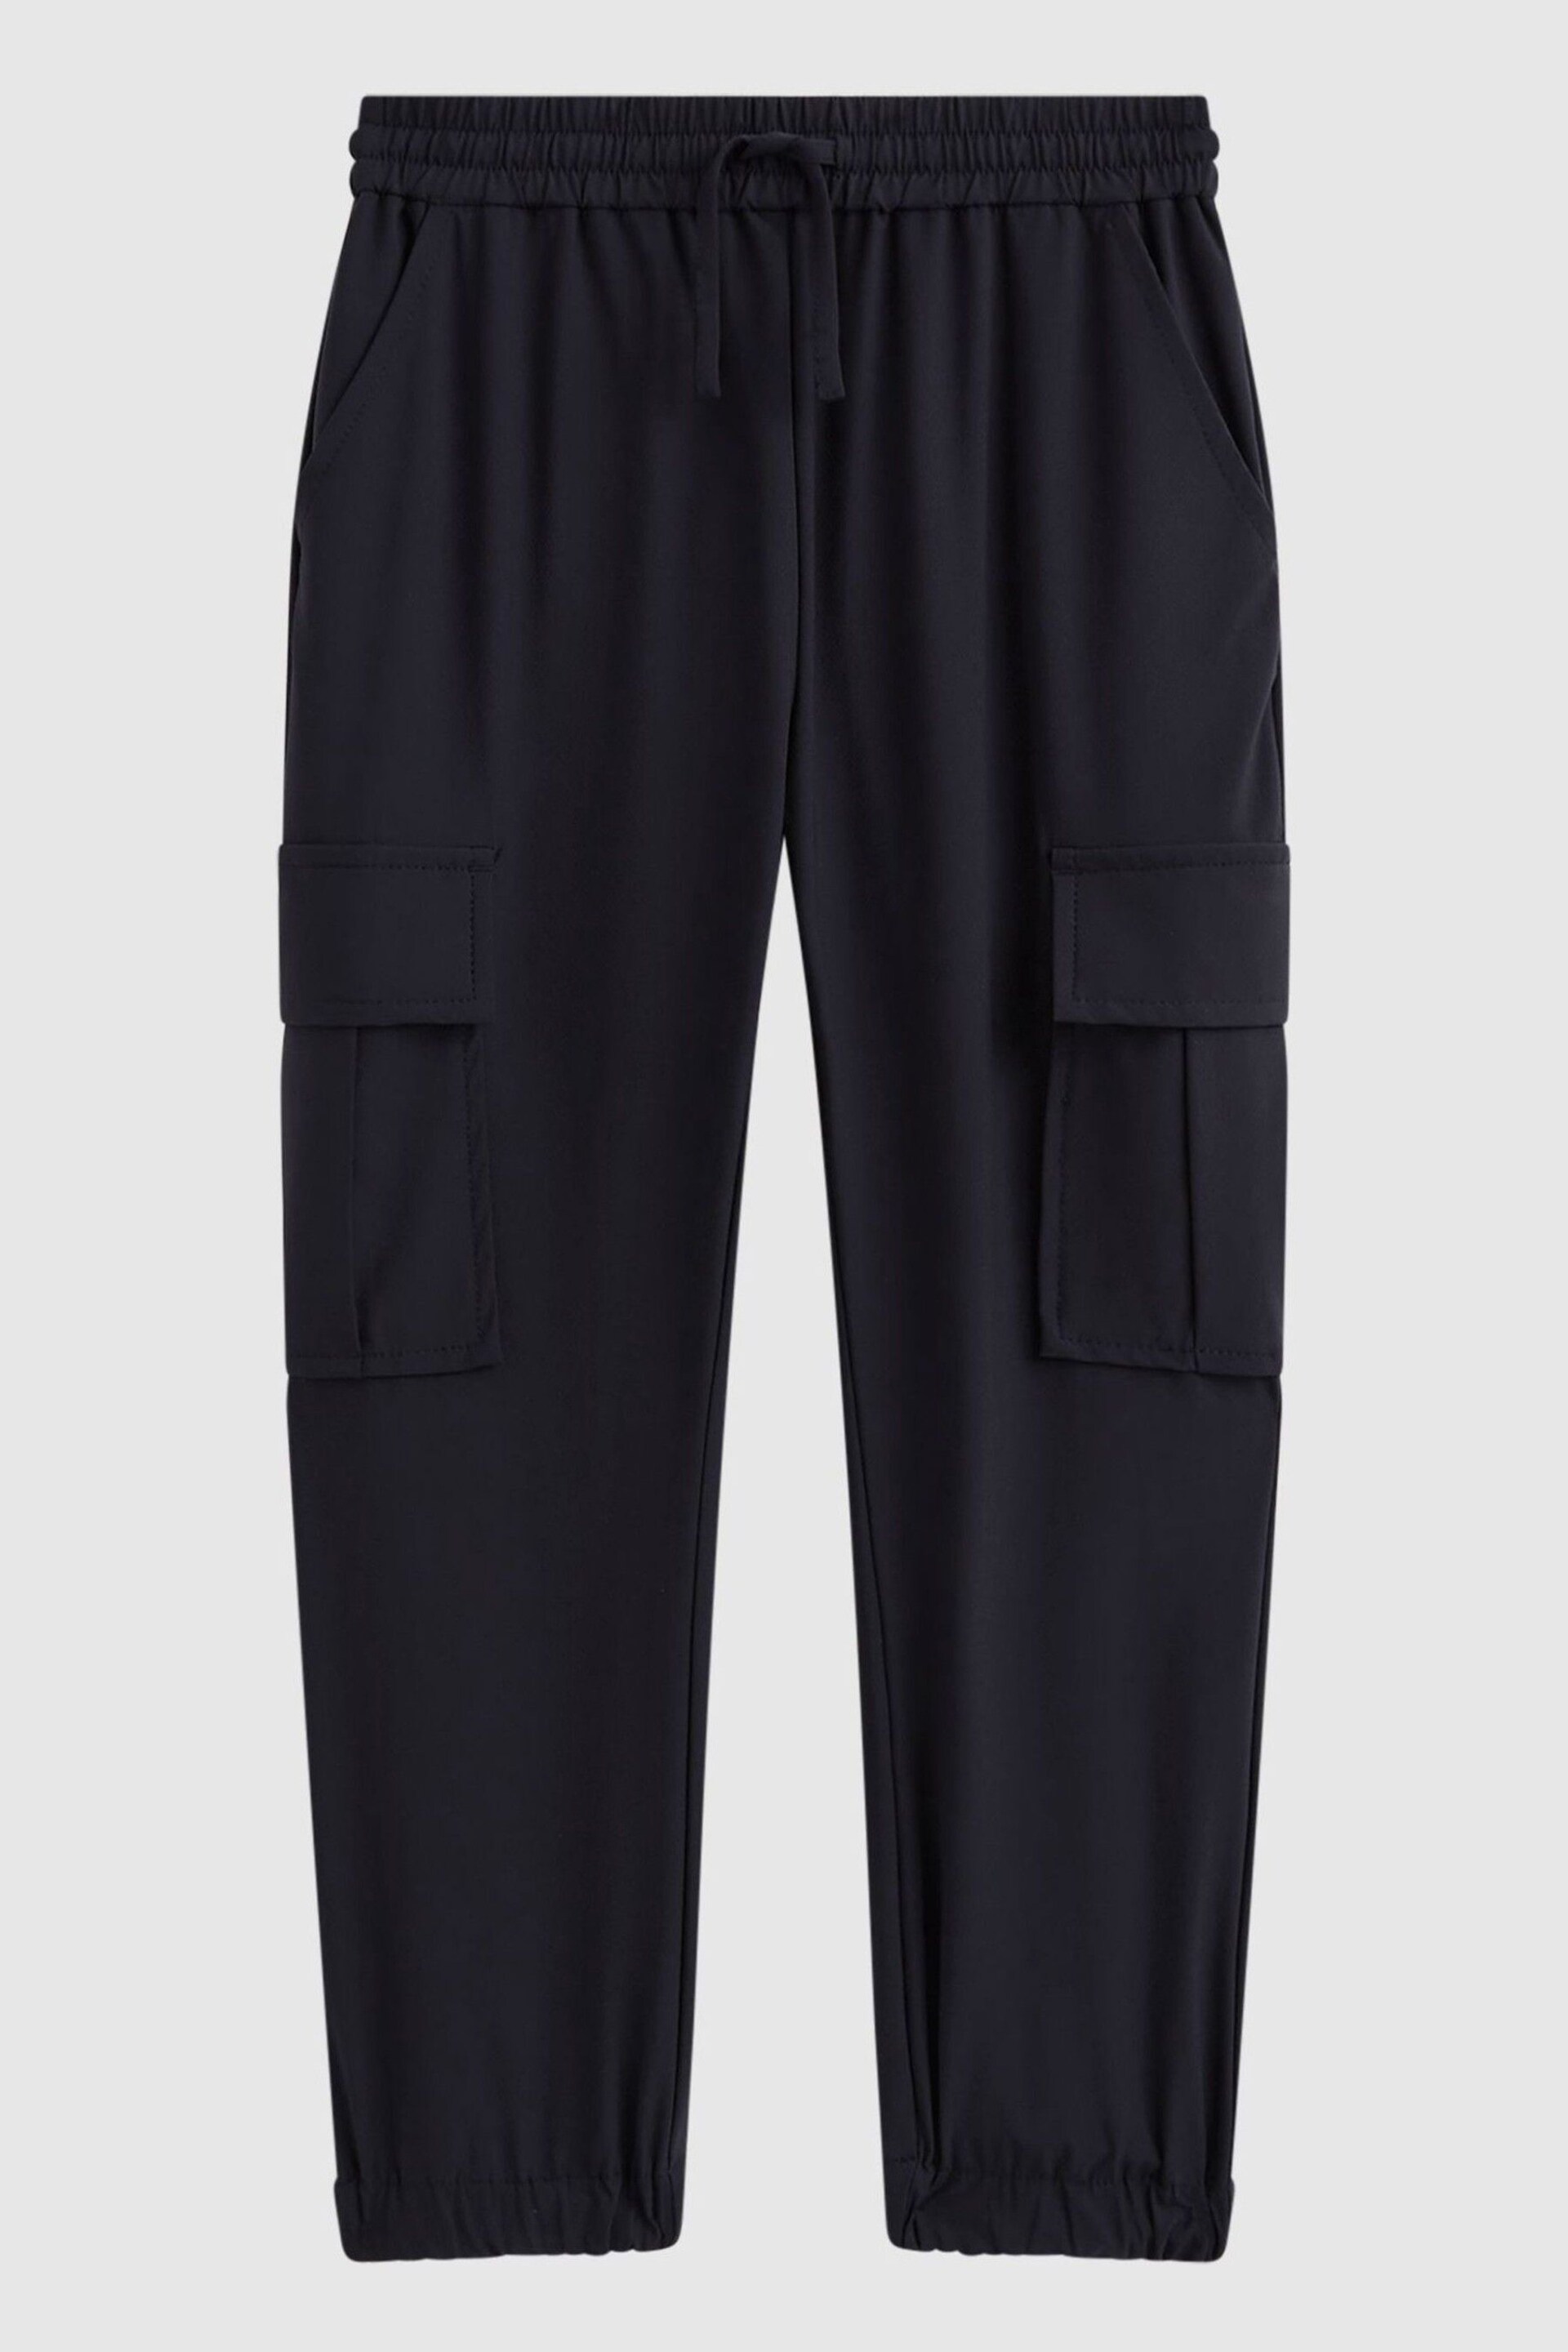 Reiss Navy Lucian Junior Technical Drawstring Cuffed Joggers - Image 2 of 5